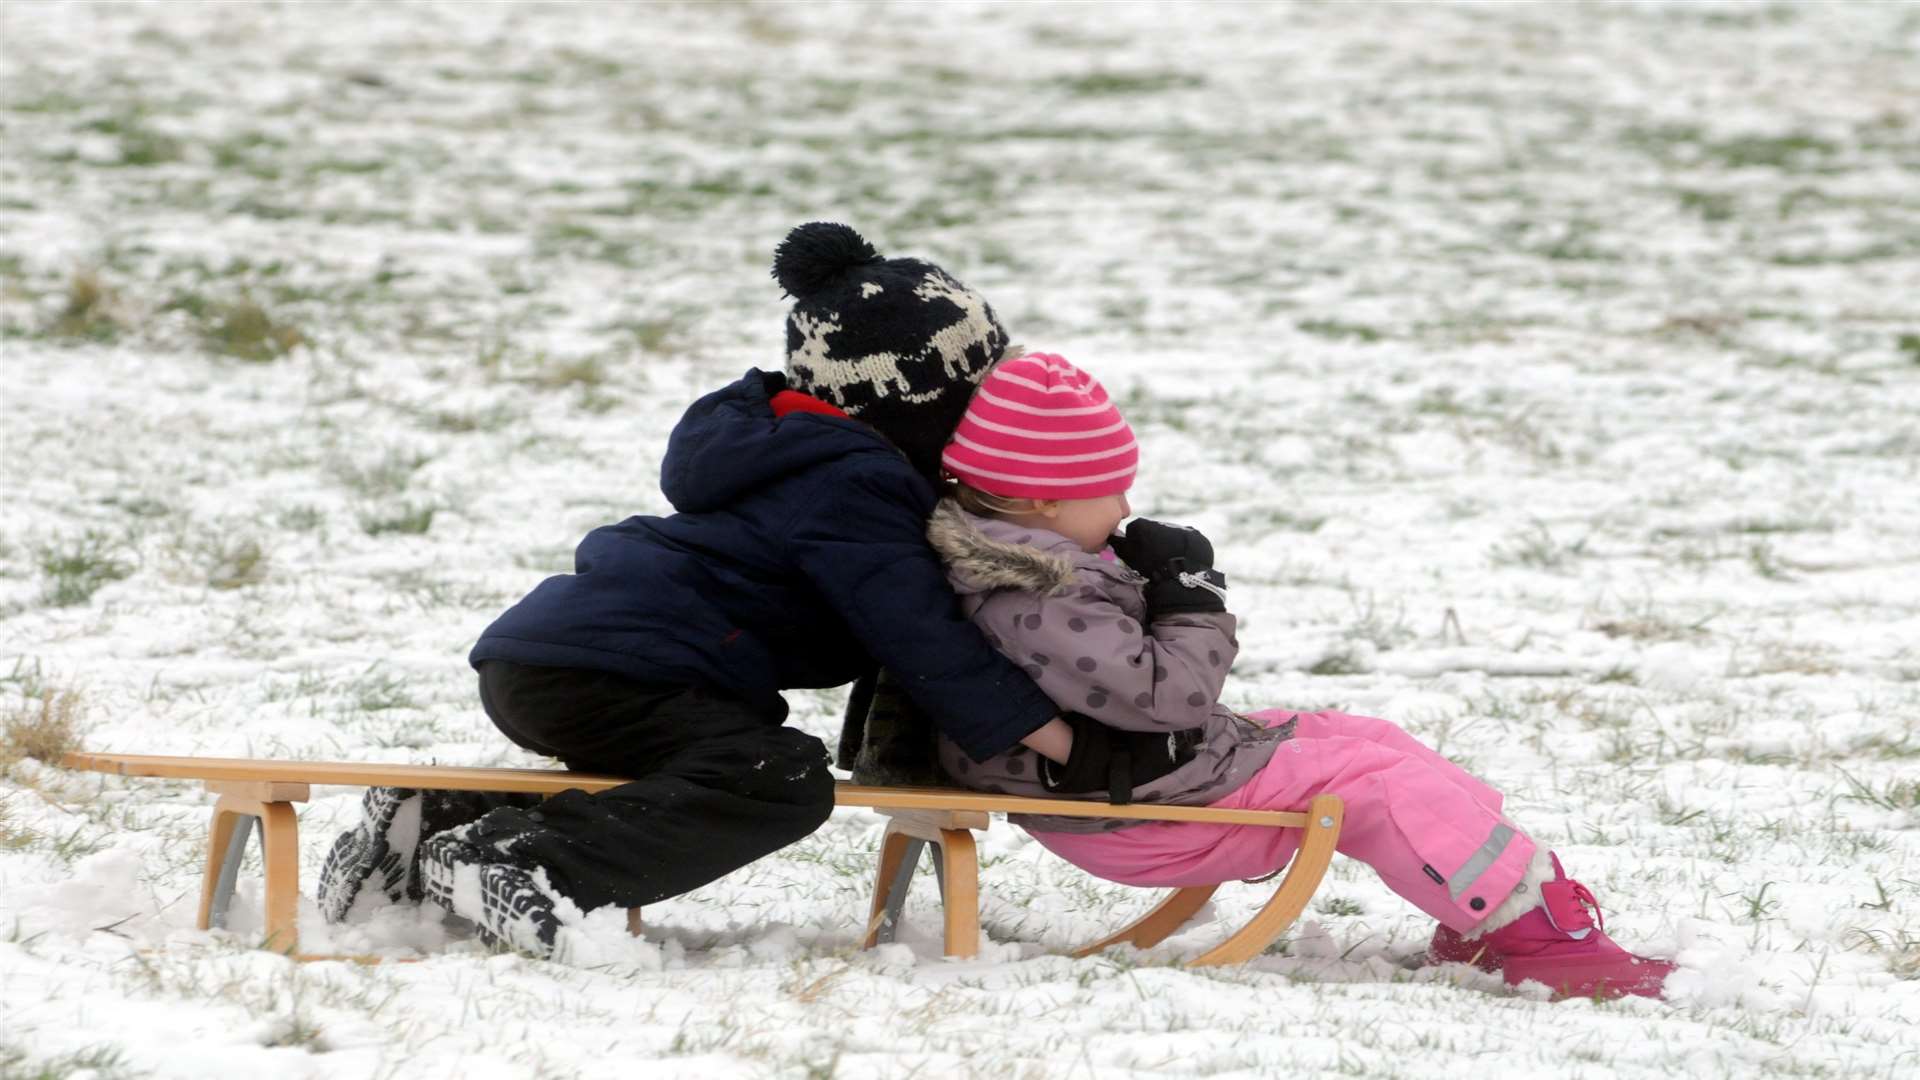 These conditions are perfect for the little ones to jump on the sledge